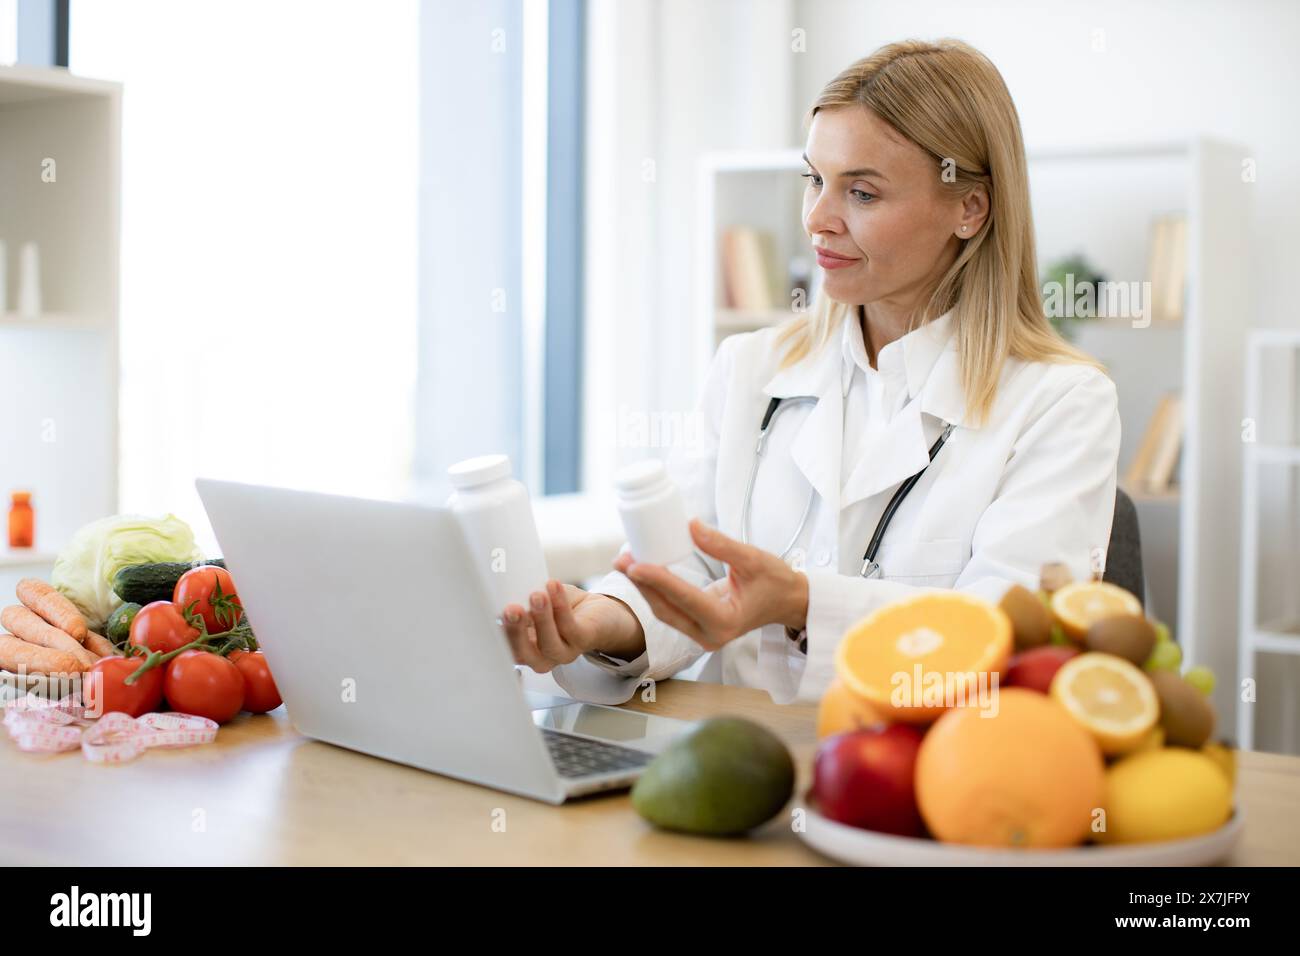 Telehealth and telemedicine concept. Mature nutritionist female doctor explaining medical treatment to the patient through a video conference using la Stock Photo